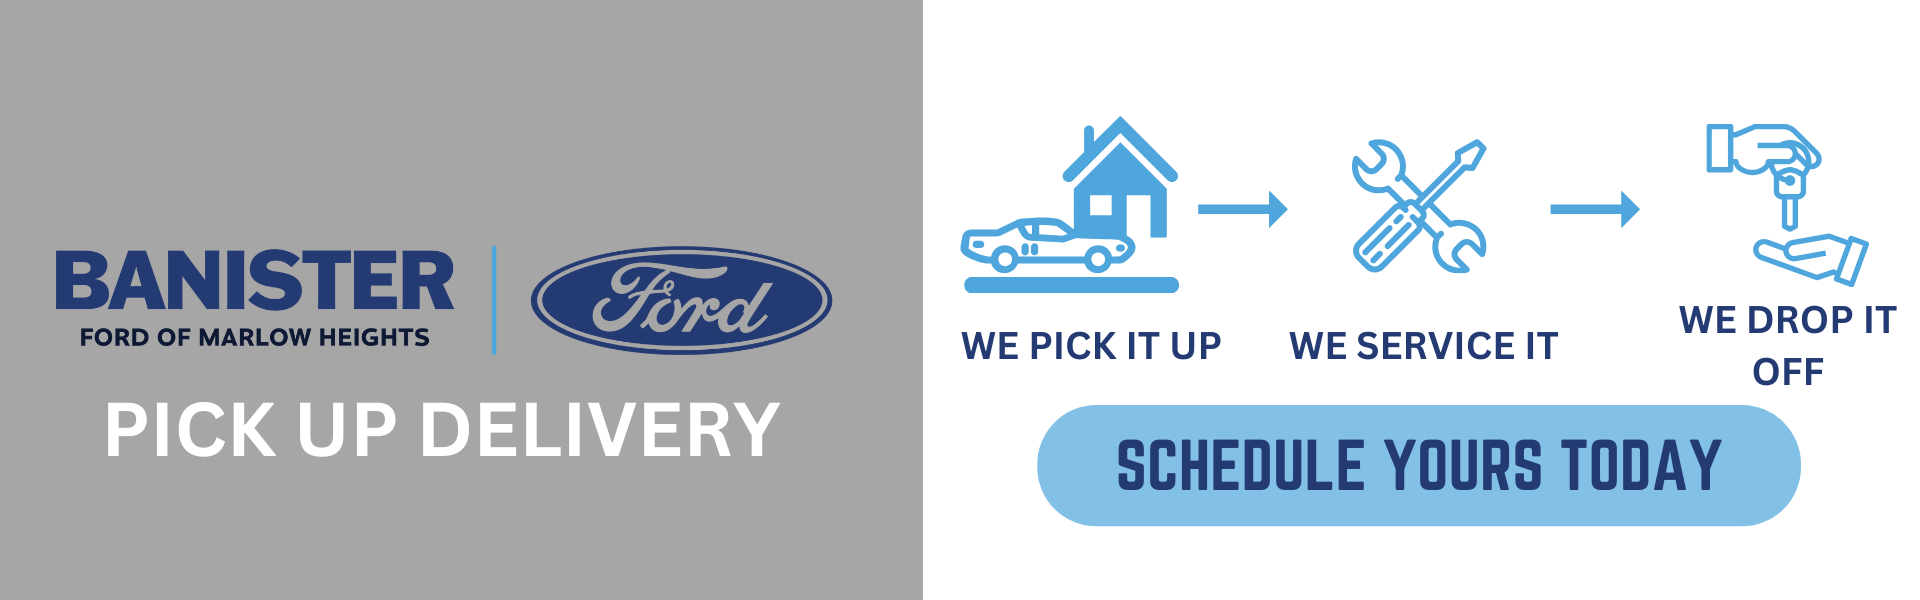 Schedule Pickup Delivery Service at Banister Ford